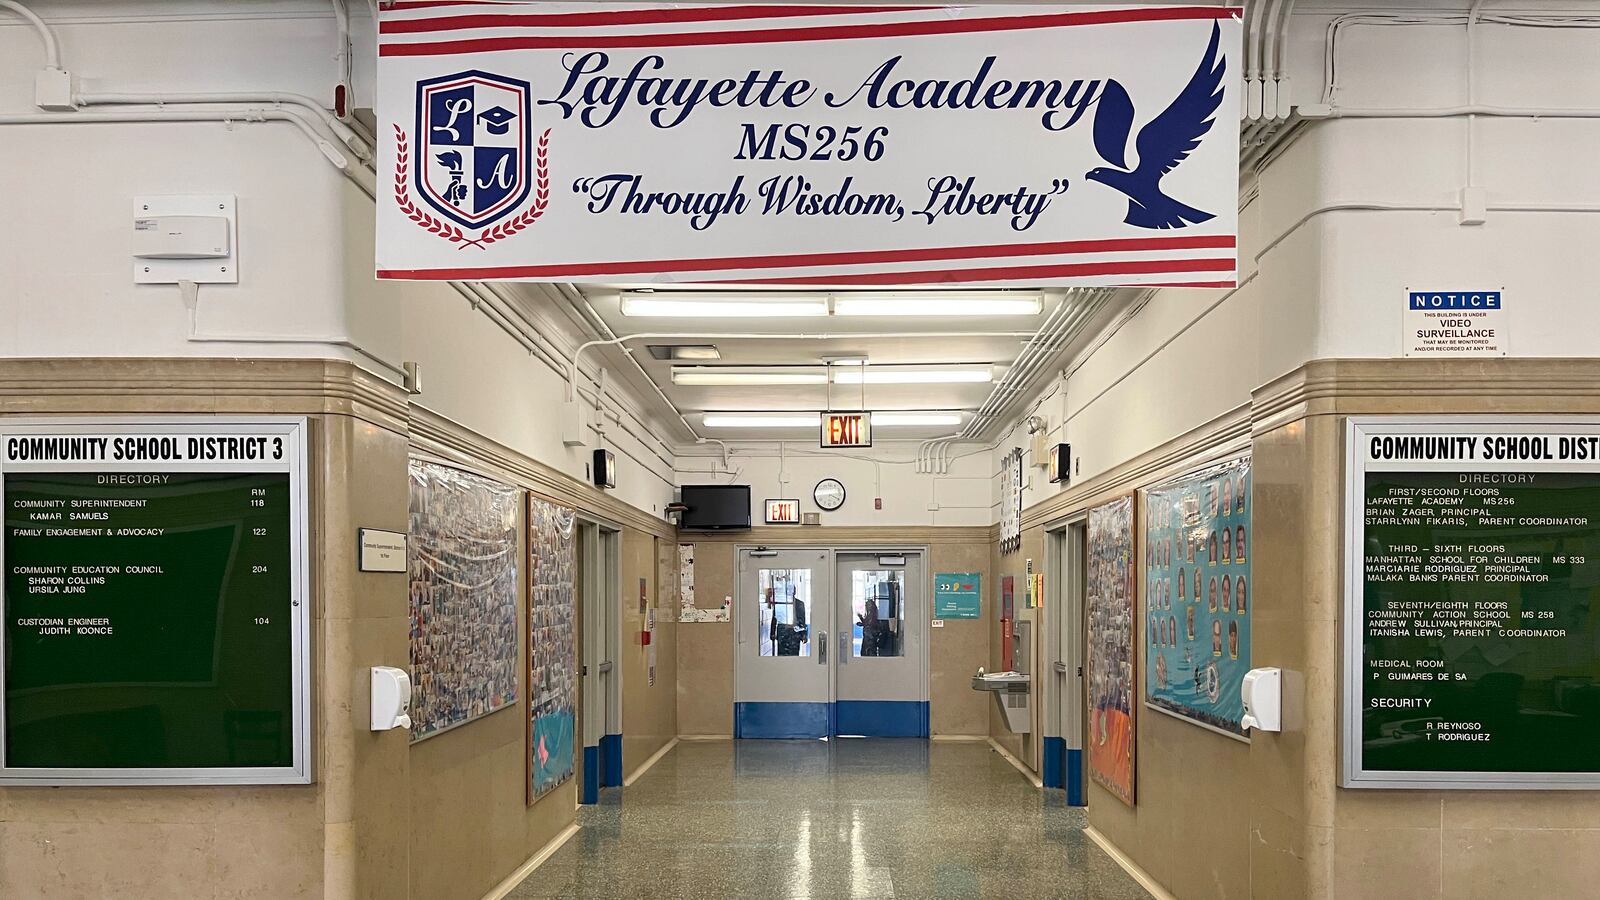 A school hallway with a red and white banner with the school name on it and bulletin boards on both sides of the hallway.